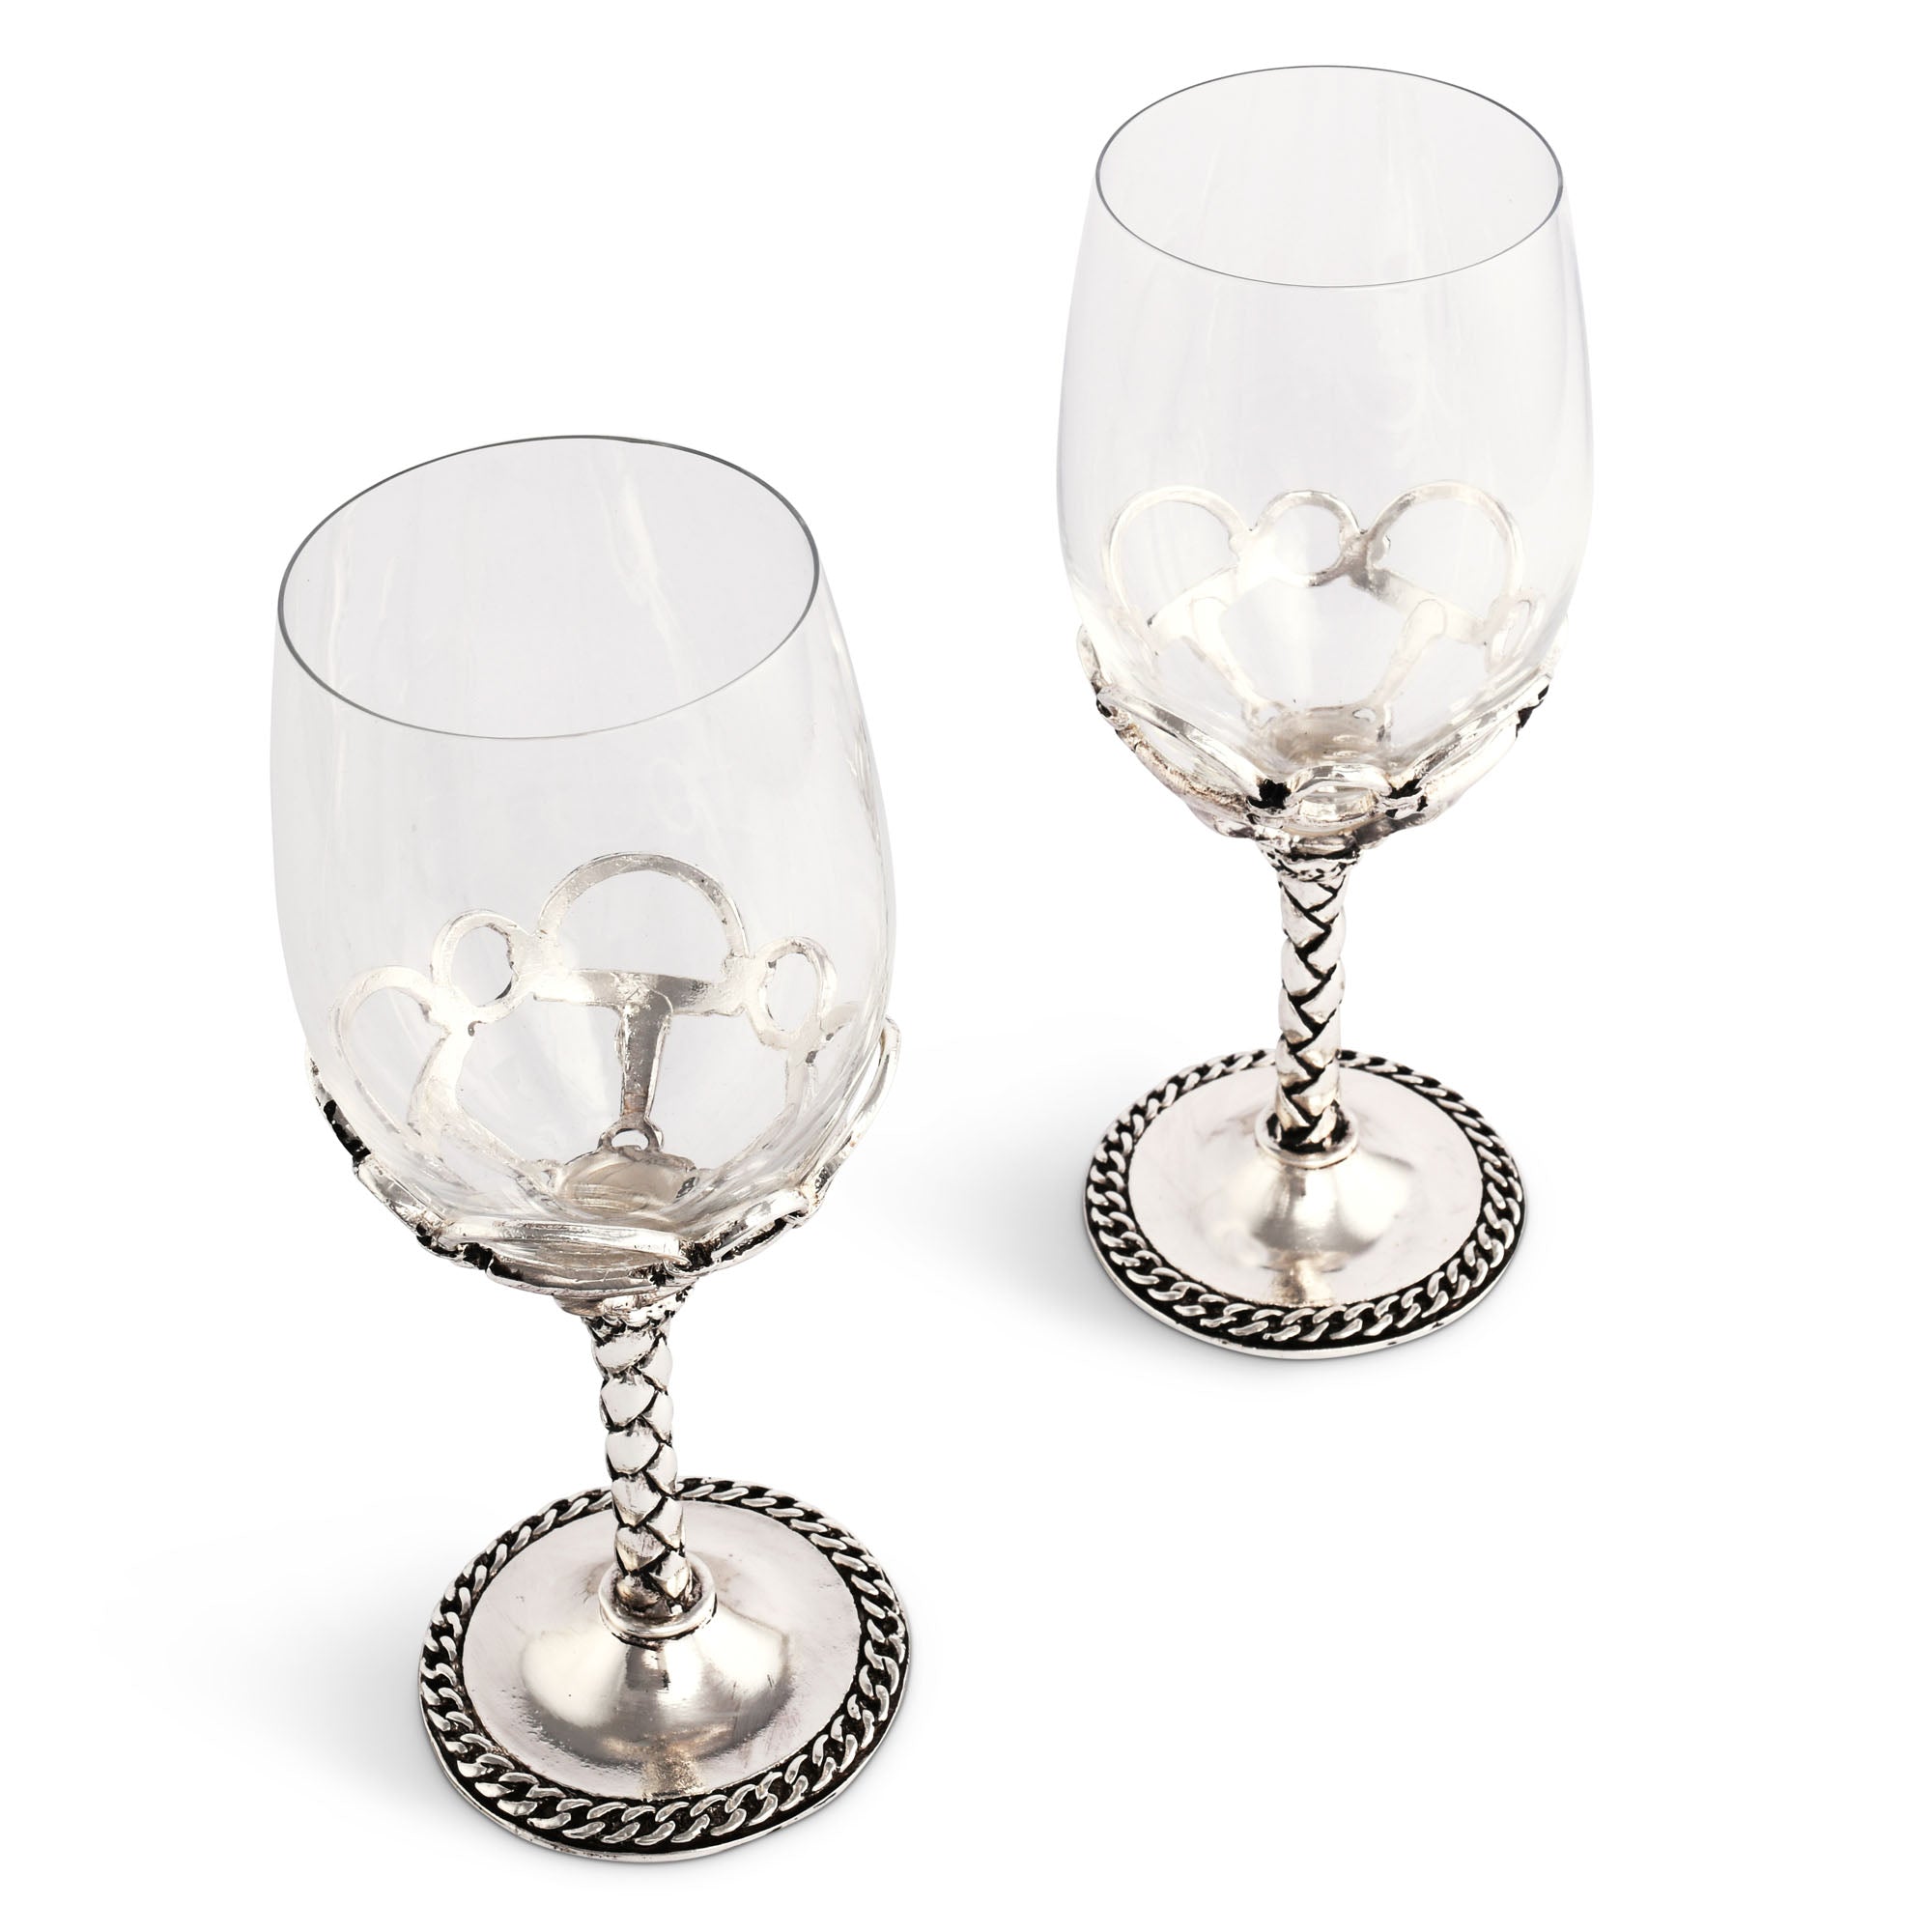 Arthur Court Equestrian Pair of Wine Glasses Product Image